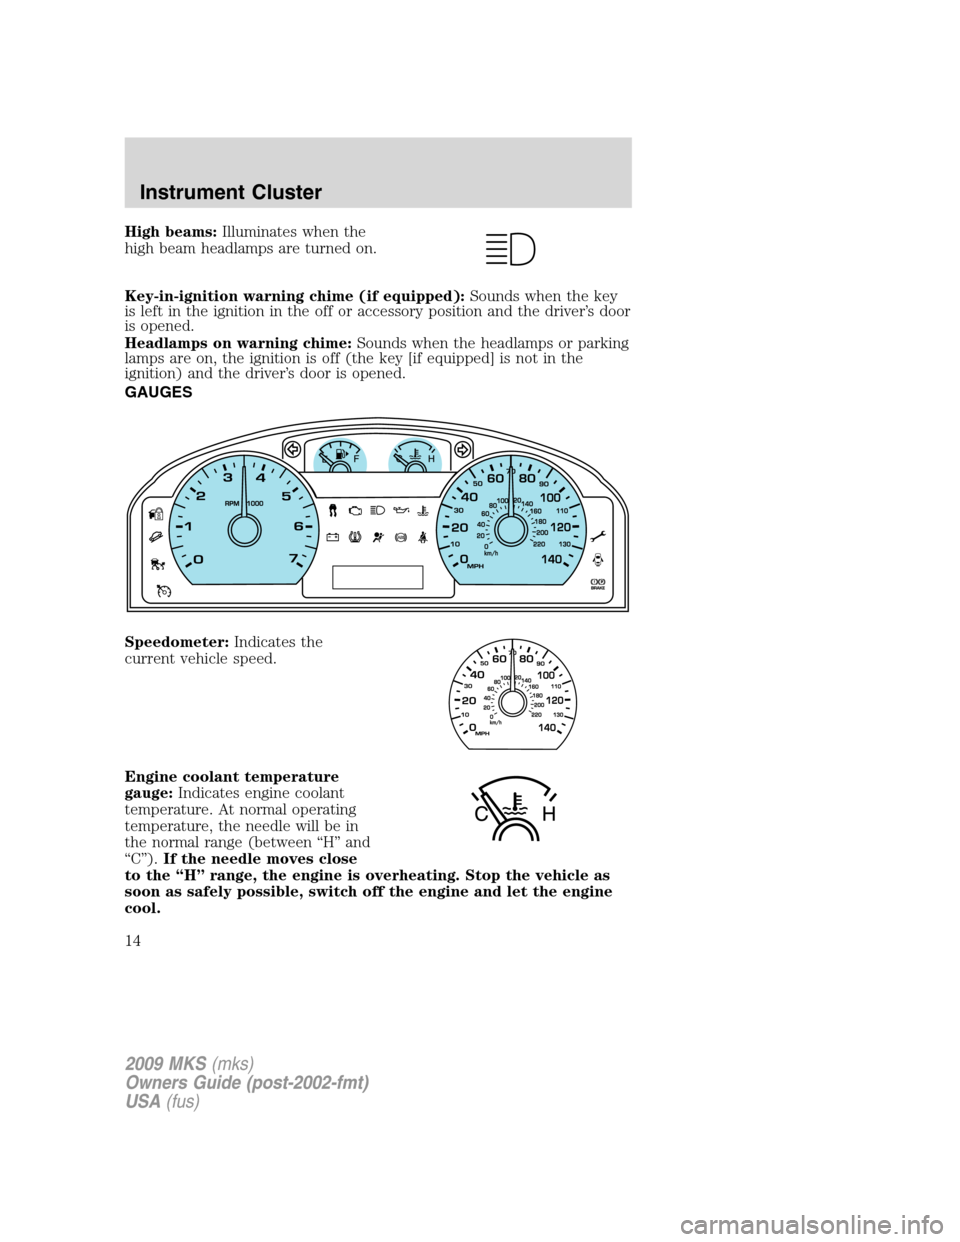 LINCOLN MKS 2009  Owners Manual High beams:Illuminates when the
high beam headlamps are turned on.
Key-in-ignition warning chime (if equipped):Sounds when the key
is left in the ignition in the off or accessory position and the driv